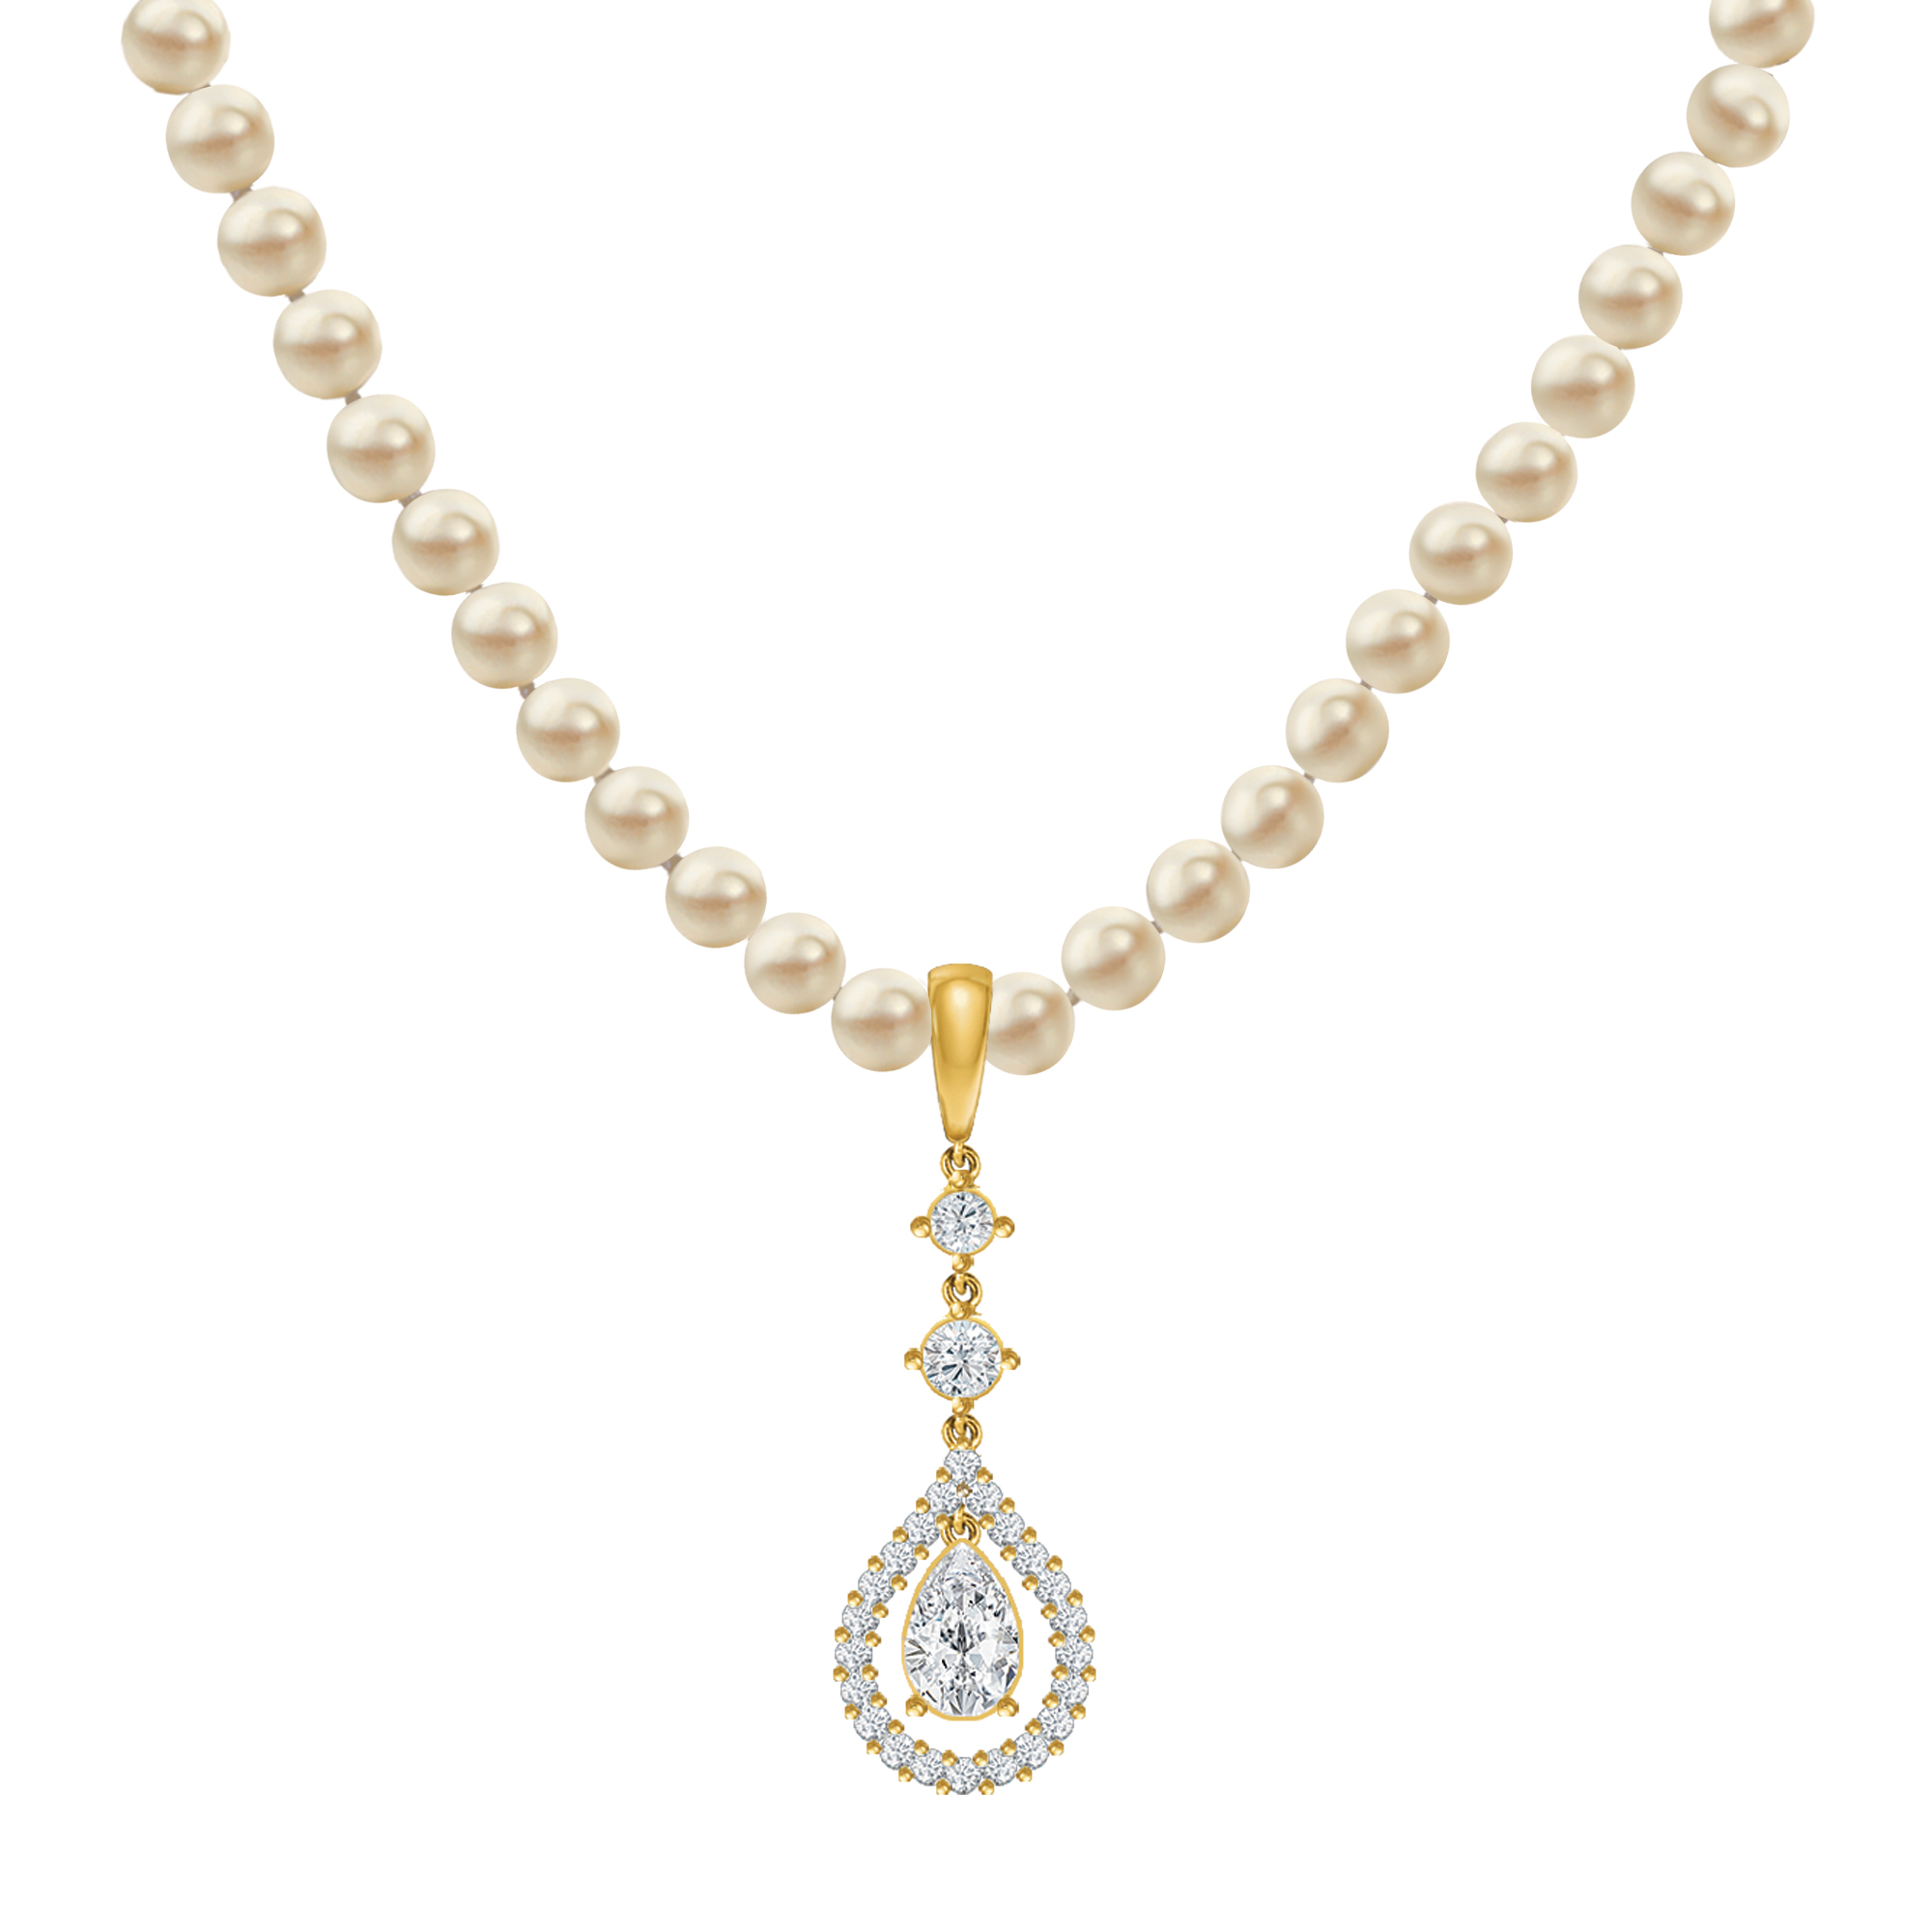 Loves Embrace Pearl Necklace Earring Set 6914 0010 a main